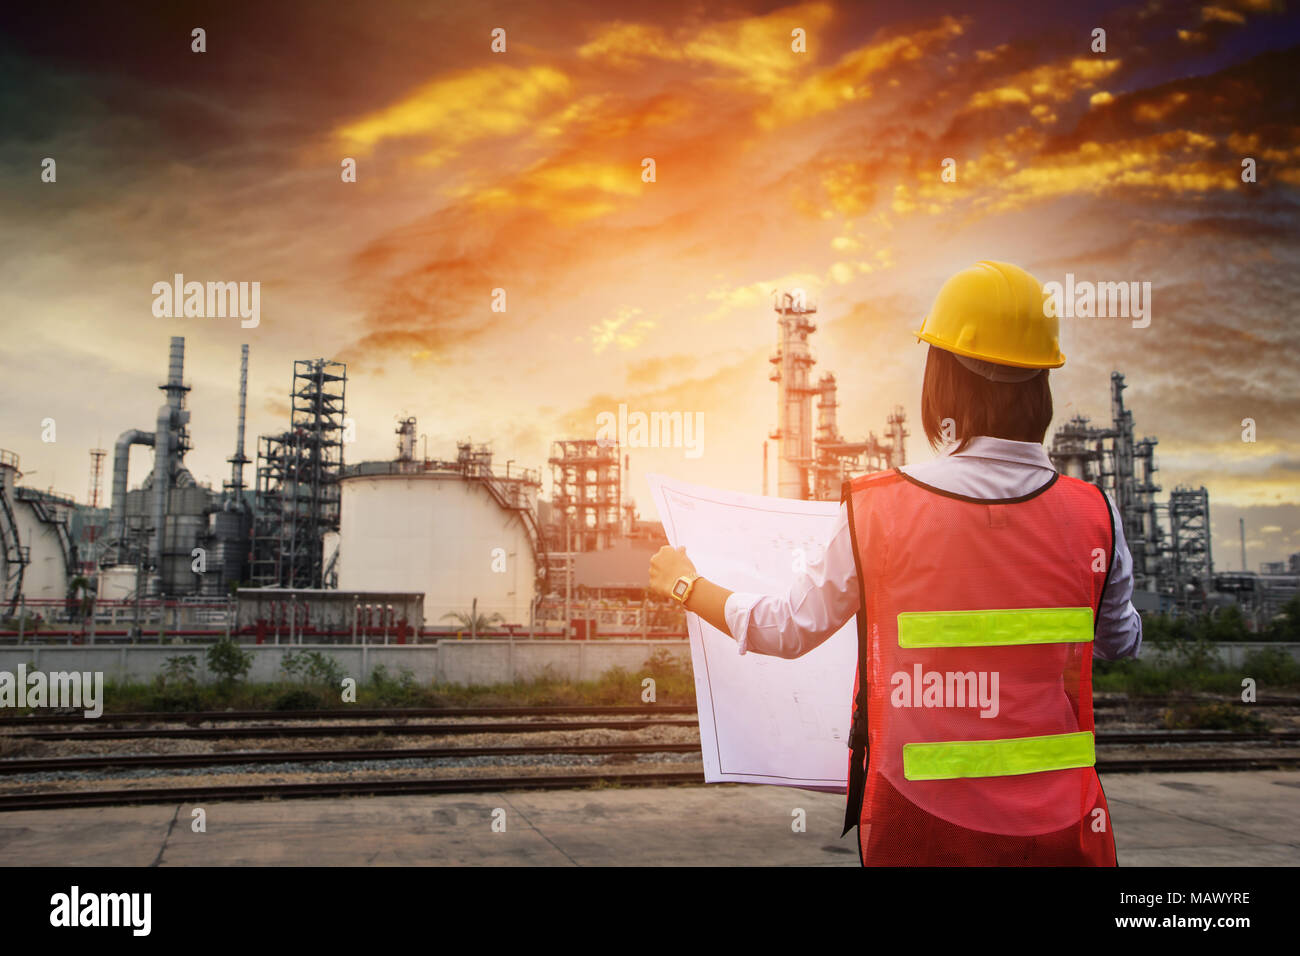 The people worker women engineer work control at power plant energy industry manufacturing oil refinery. Engineering check plant with blue print at su Stock Photo